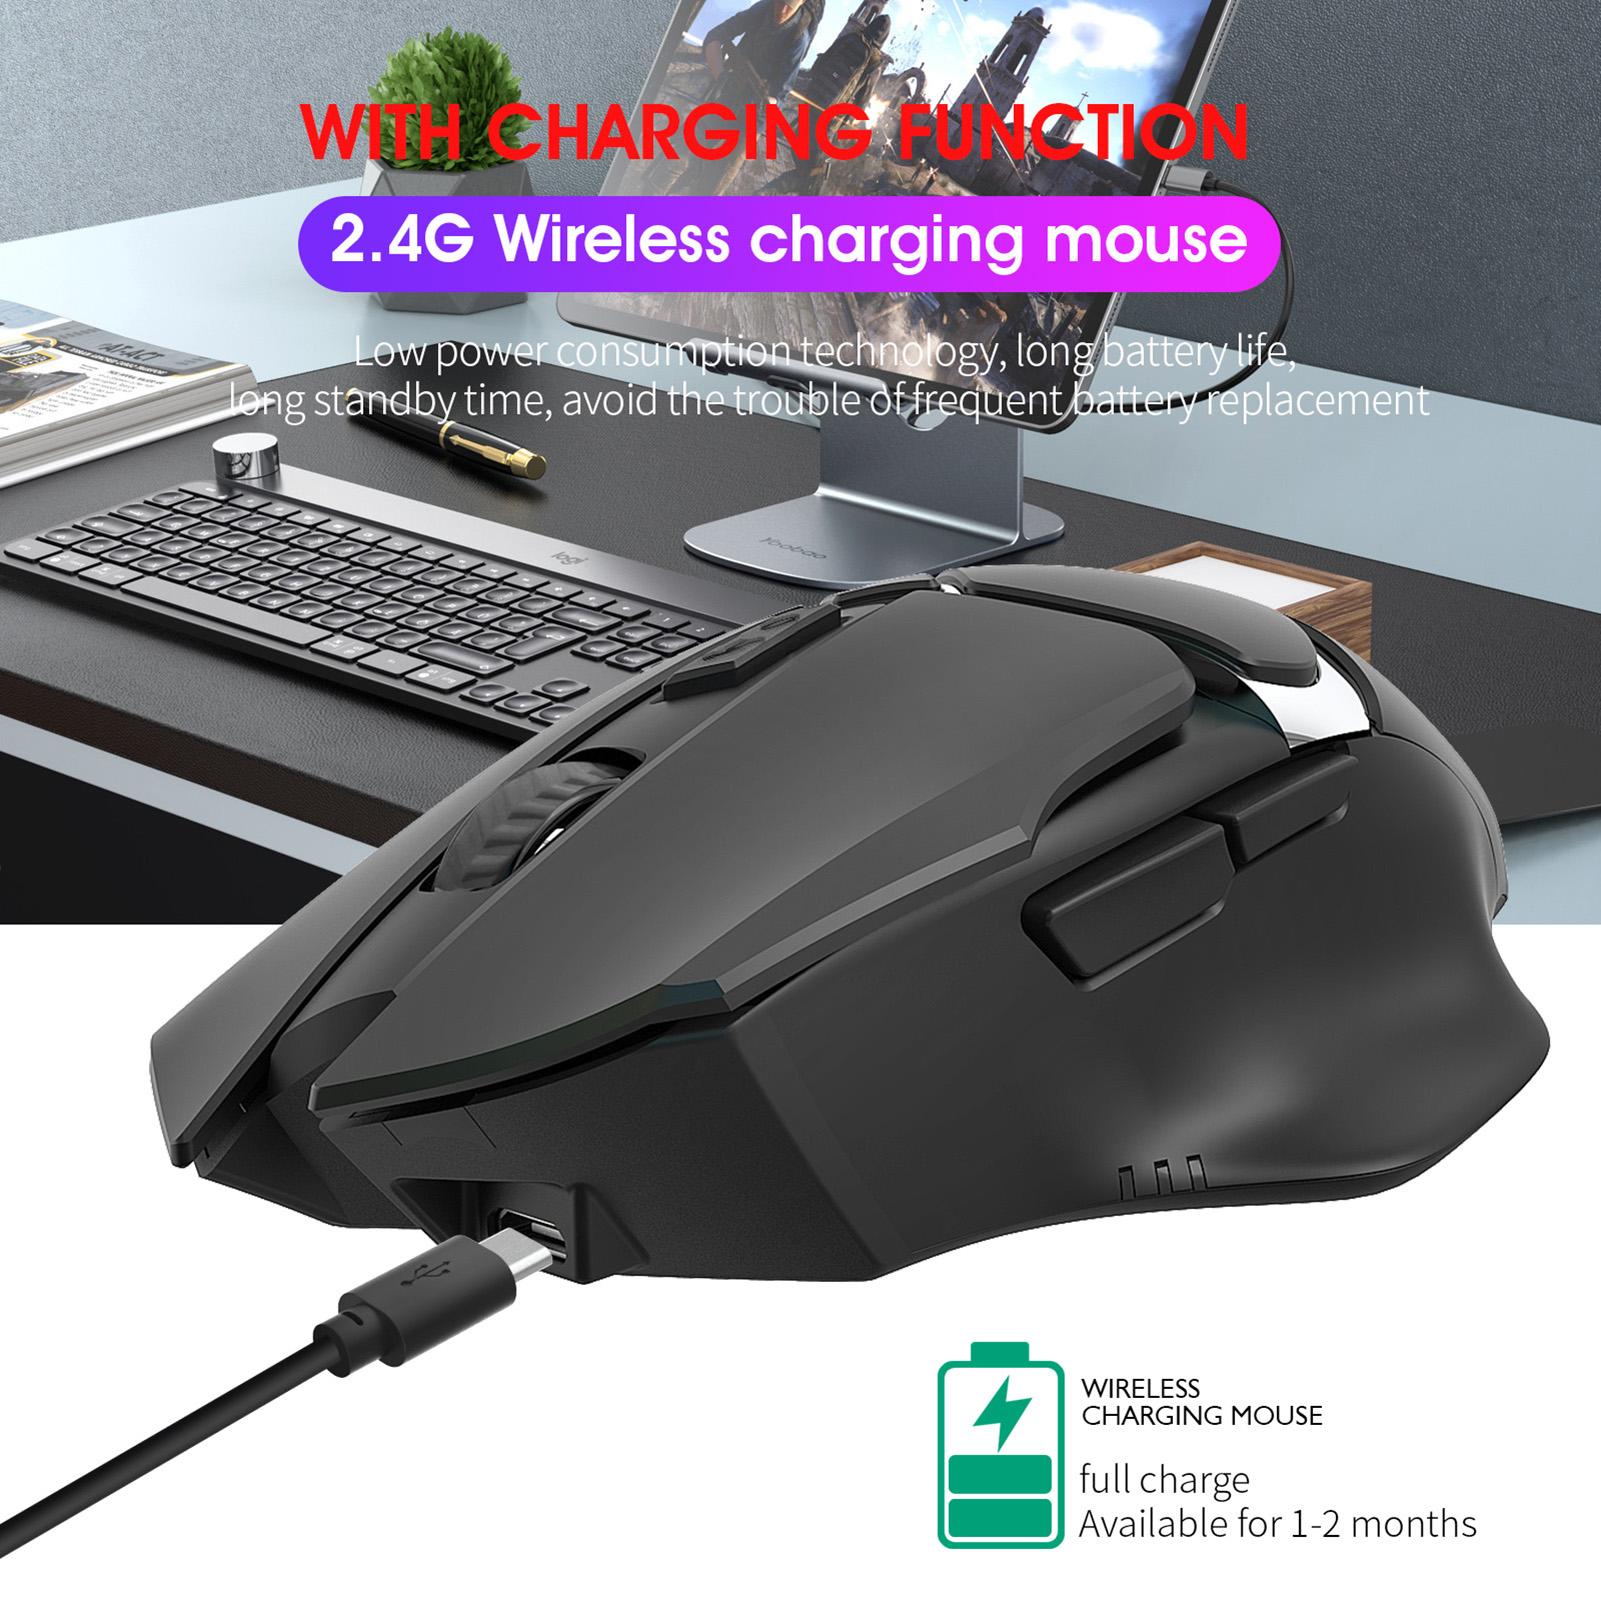 HXSJ T60 Wireless Gaming Mouse 2.4G Wireless Charging Mouse Breathing Light Mouse with Adjustable DPI Black